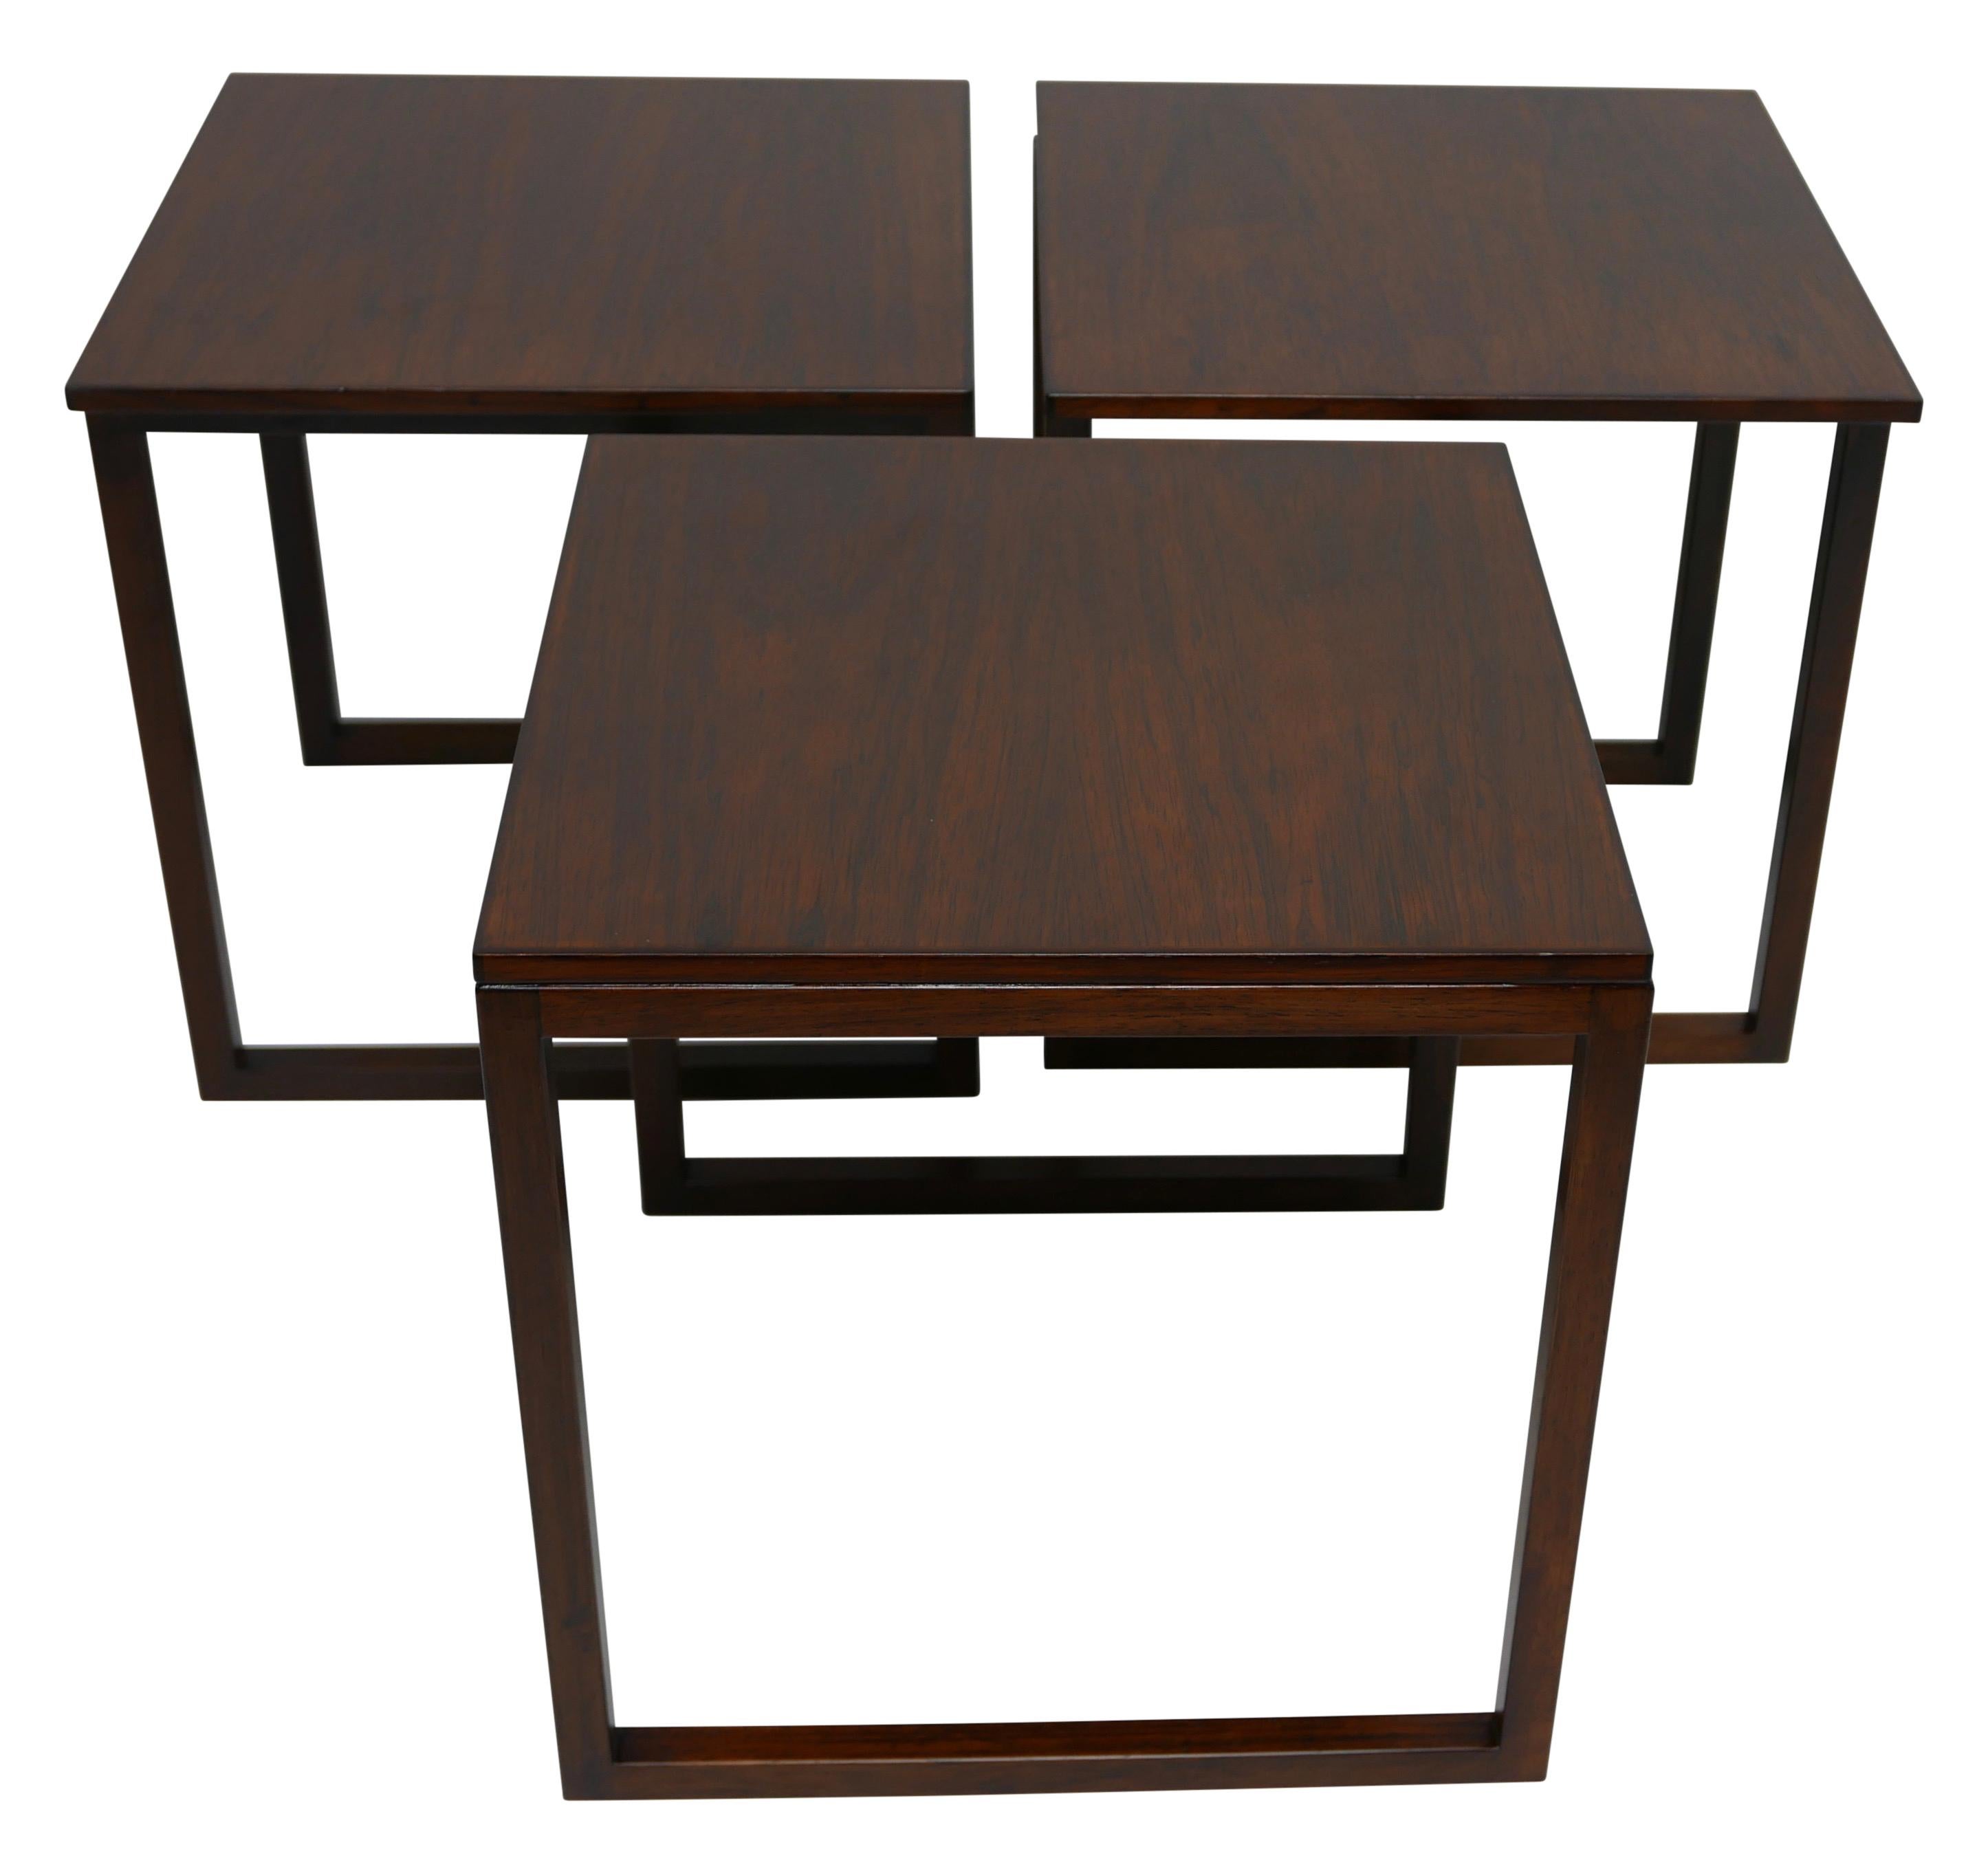 Midcentury Danish Modern Rosewood Nesting Tables, Set of Three For Sale 2